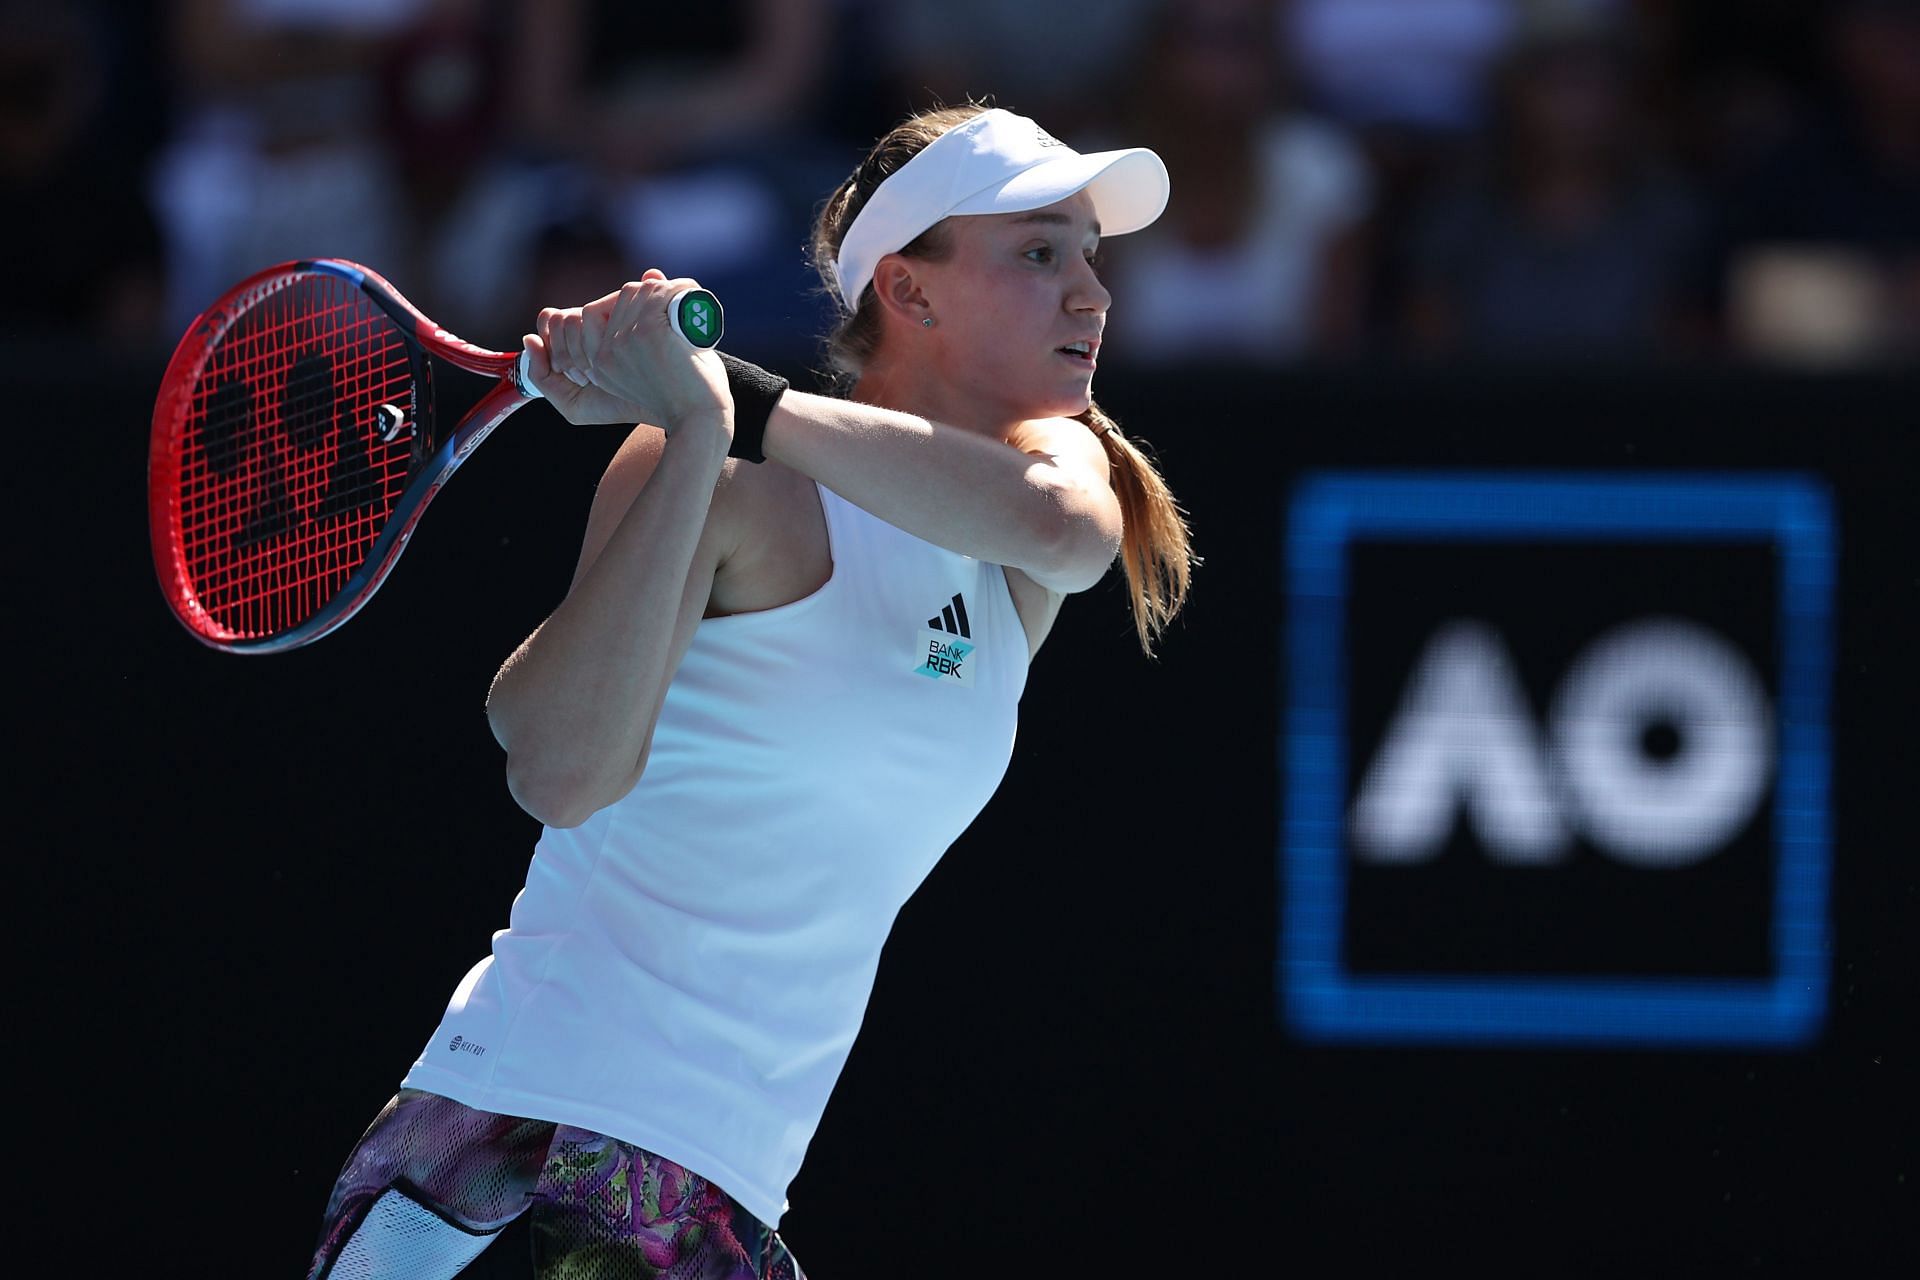 Elena Rybakina in action during her third round match at the 2023 Australian Open.